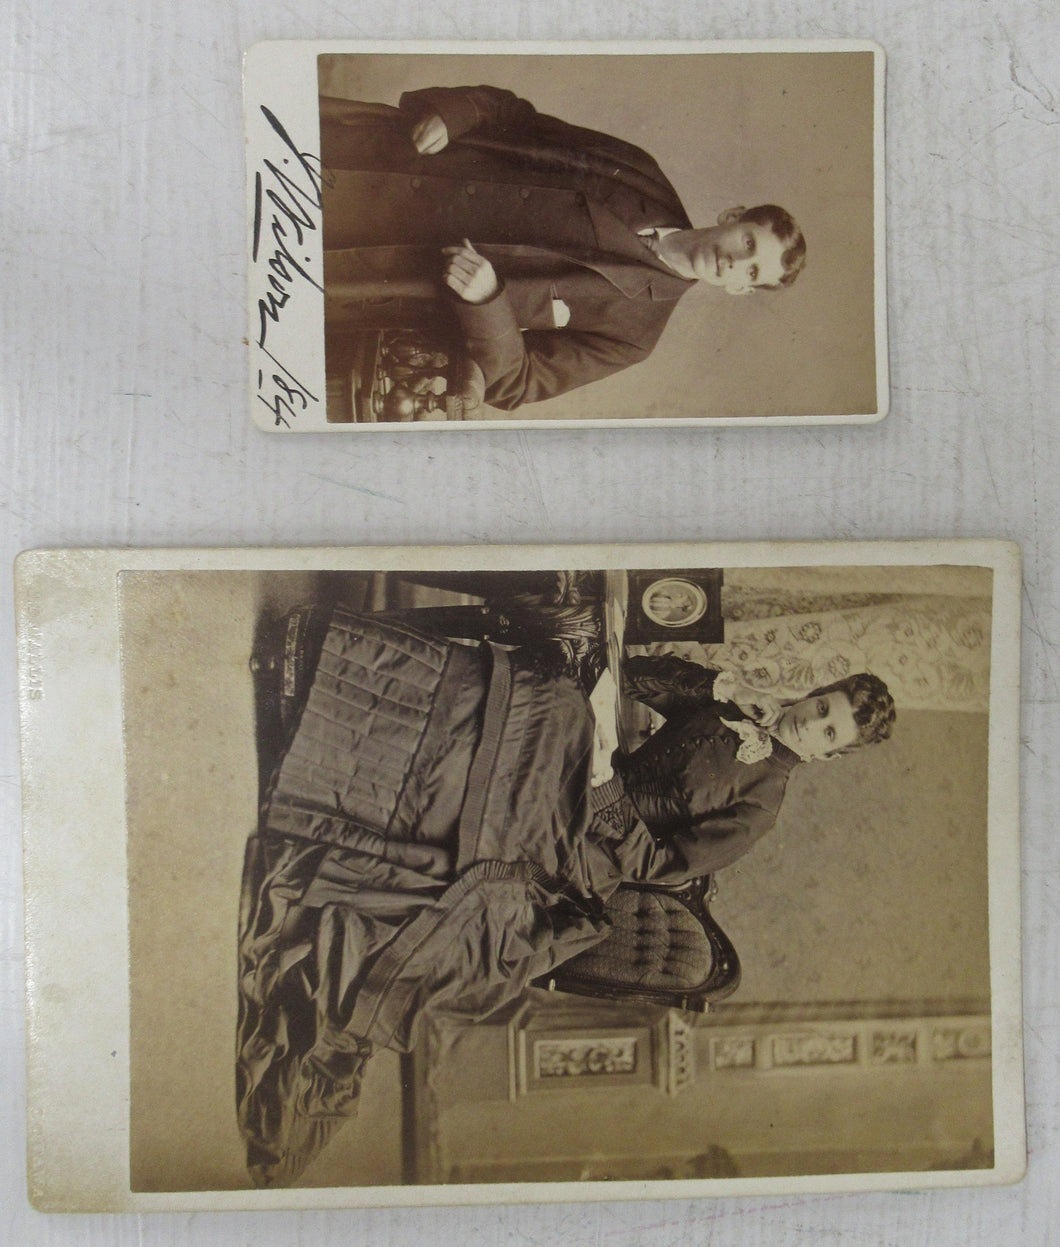 2 photos: Carte-de-visite of James Wilson and cabinet photo of his sister